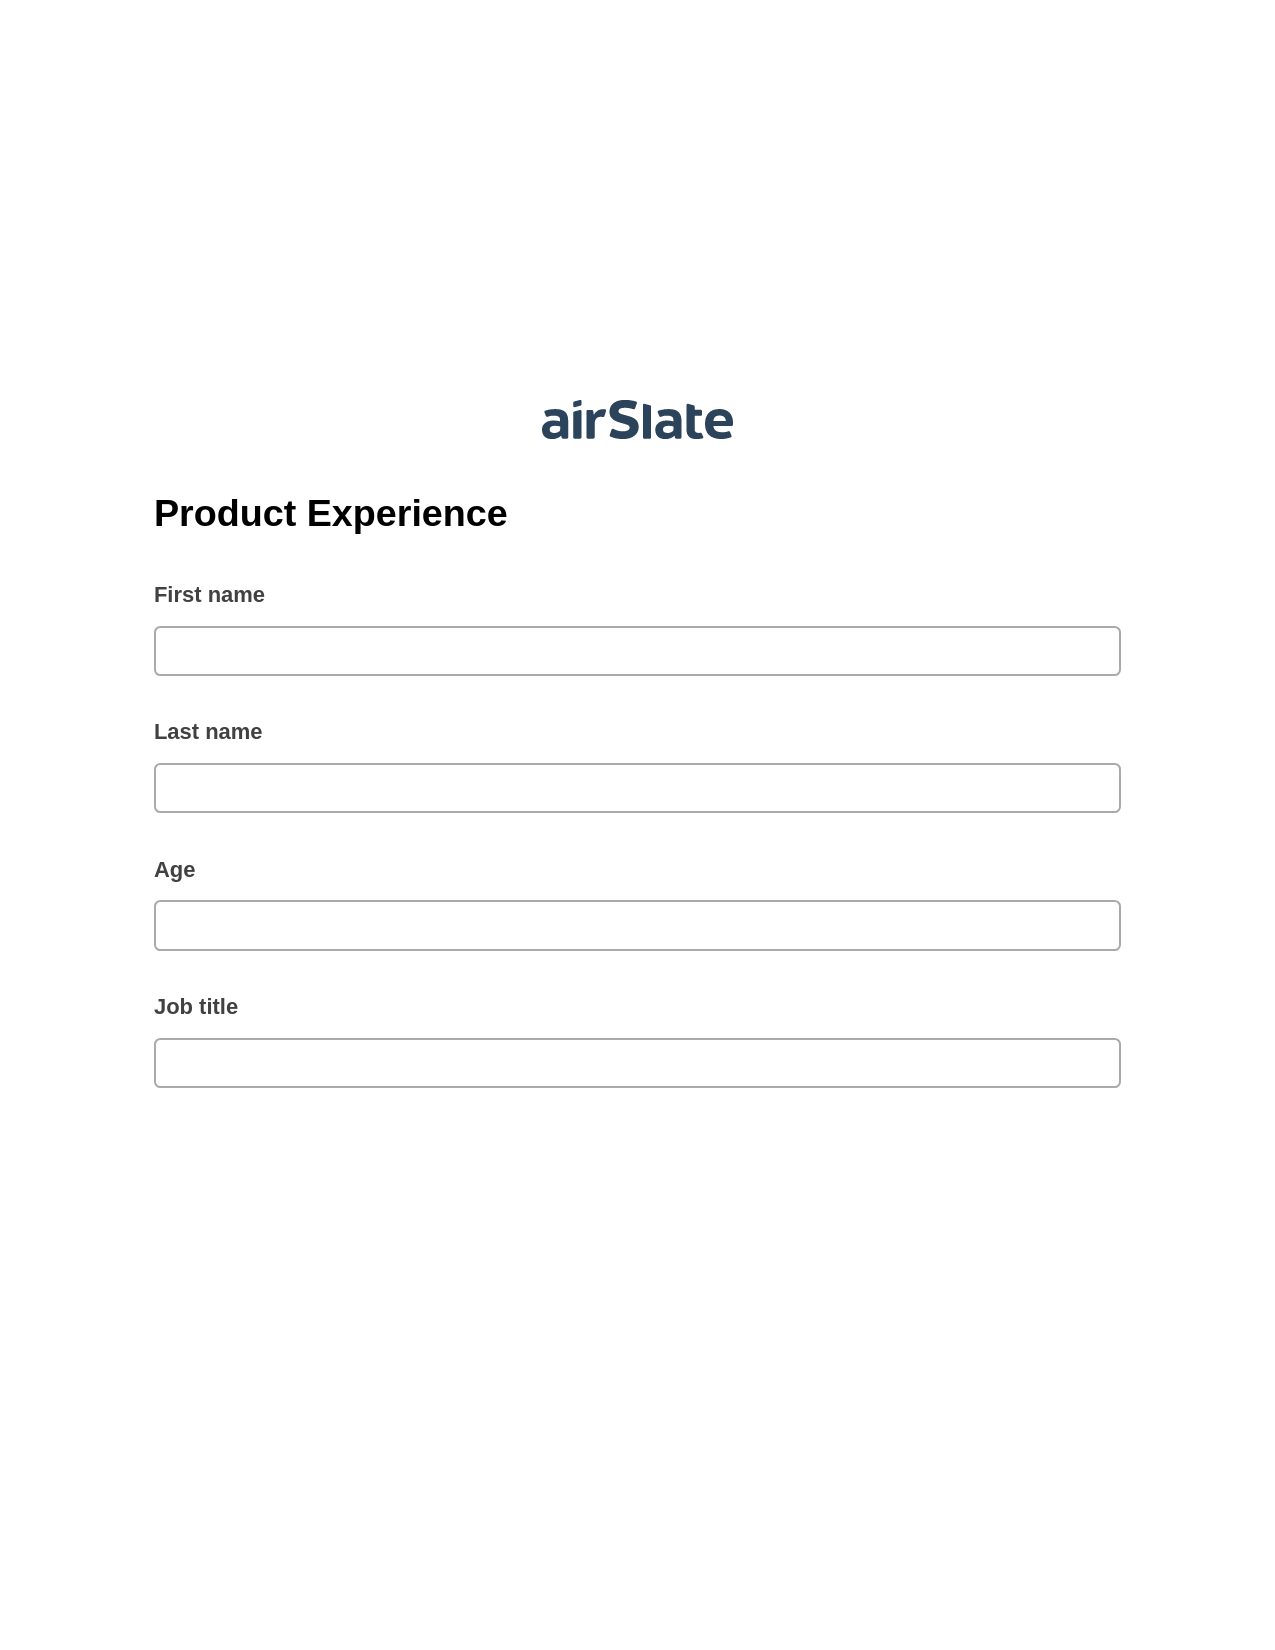 Product Experience Pre-fill from MySQL Bot, Send Mailchimp Campaign Bot, Export to Excel 365 Bot